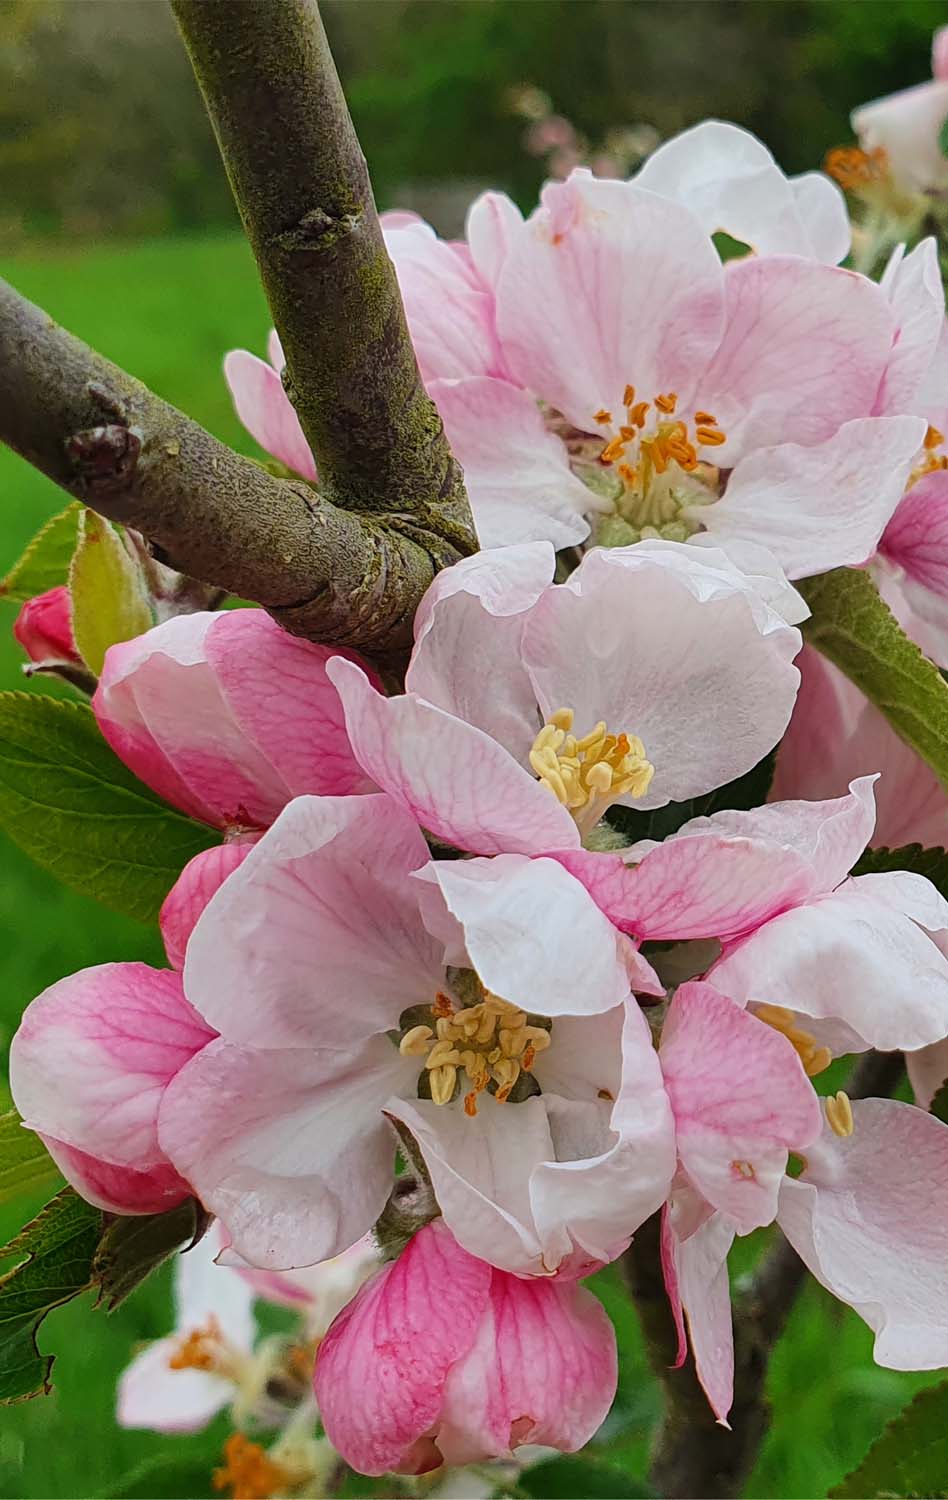 An up close image of apple blossoms